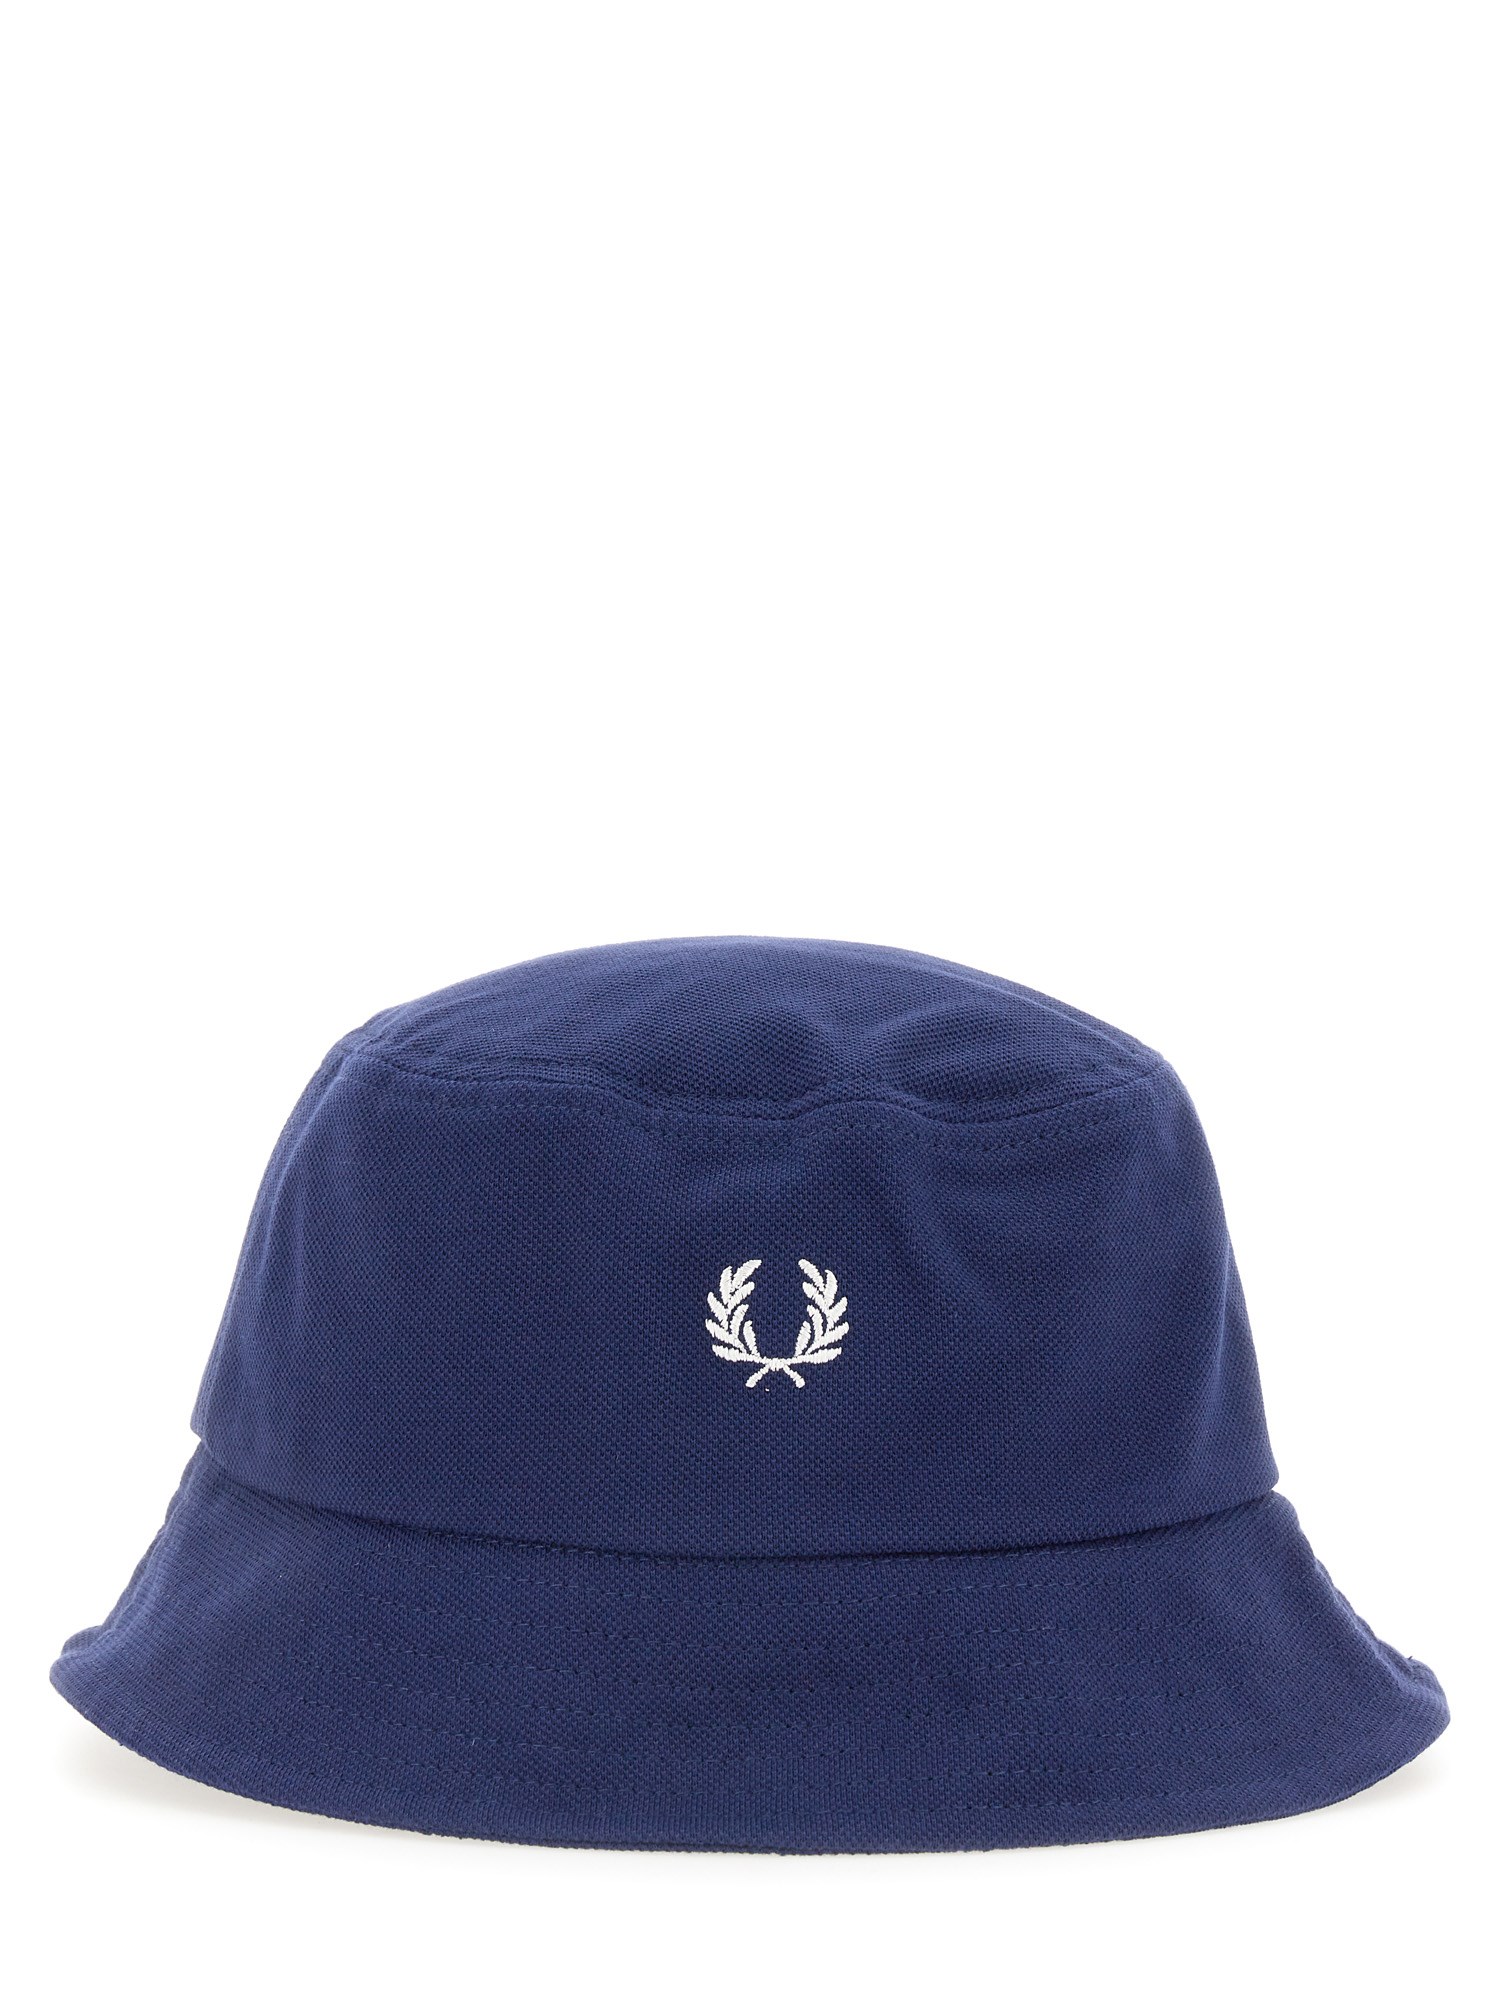 fred perry bucket hat with logo embroidery